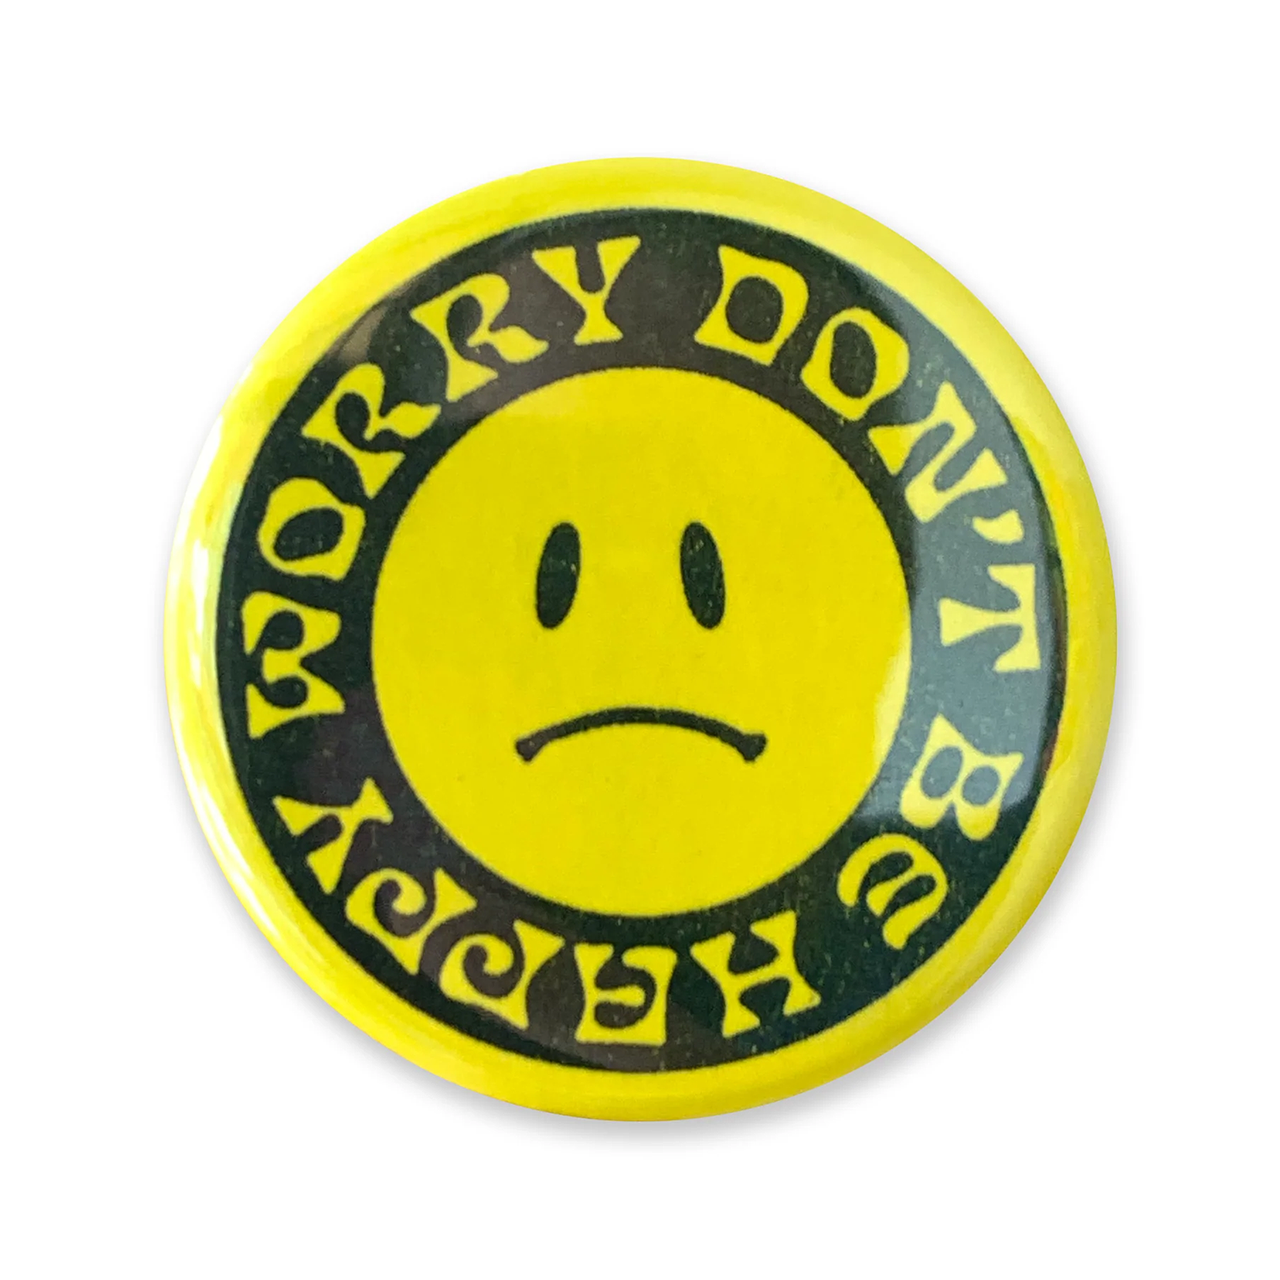 WORLD FAMOUS ORIGINAL WORRY DON'T BE HAPPY BUTTON